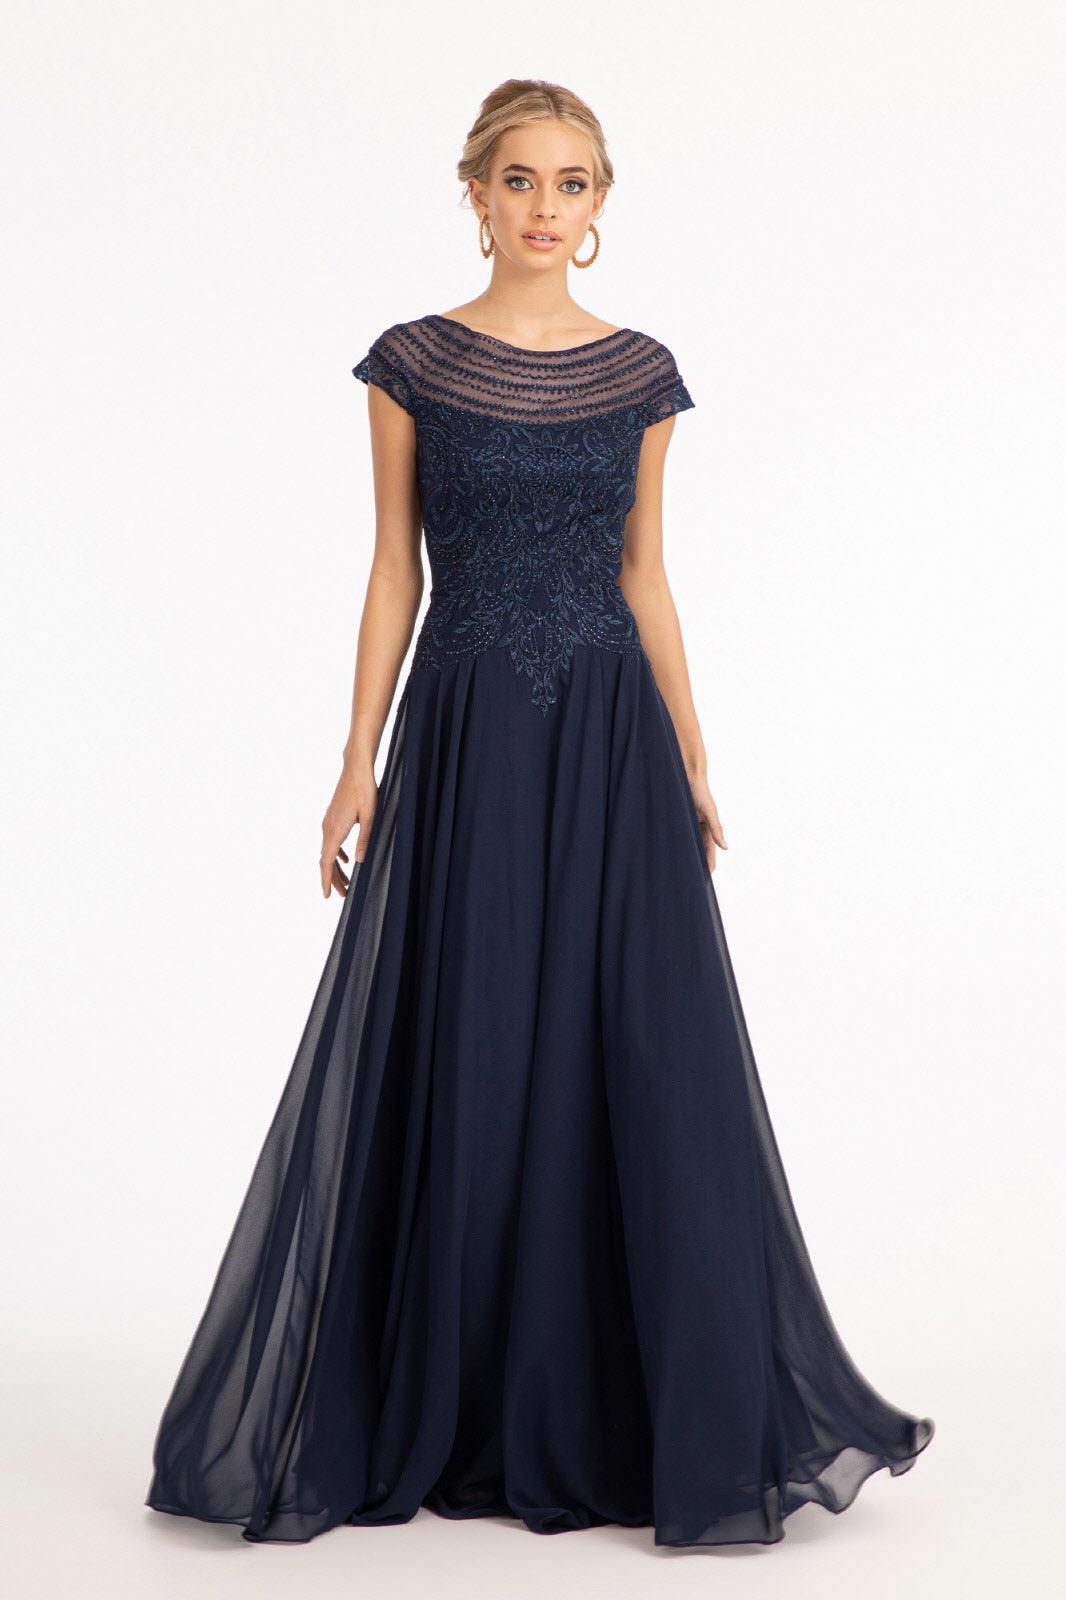 Long Formal Chiffon Mother of the Bride Dress Navy